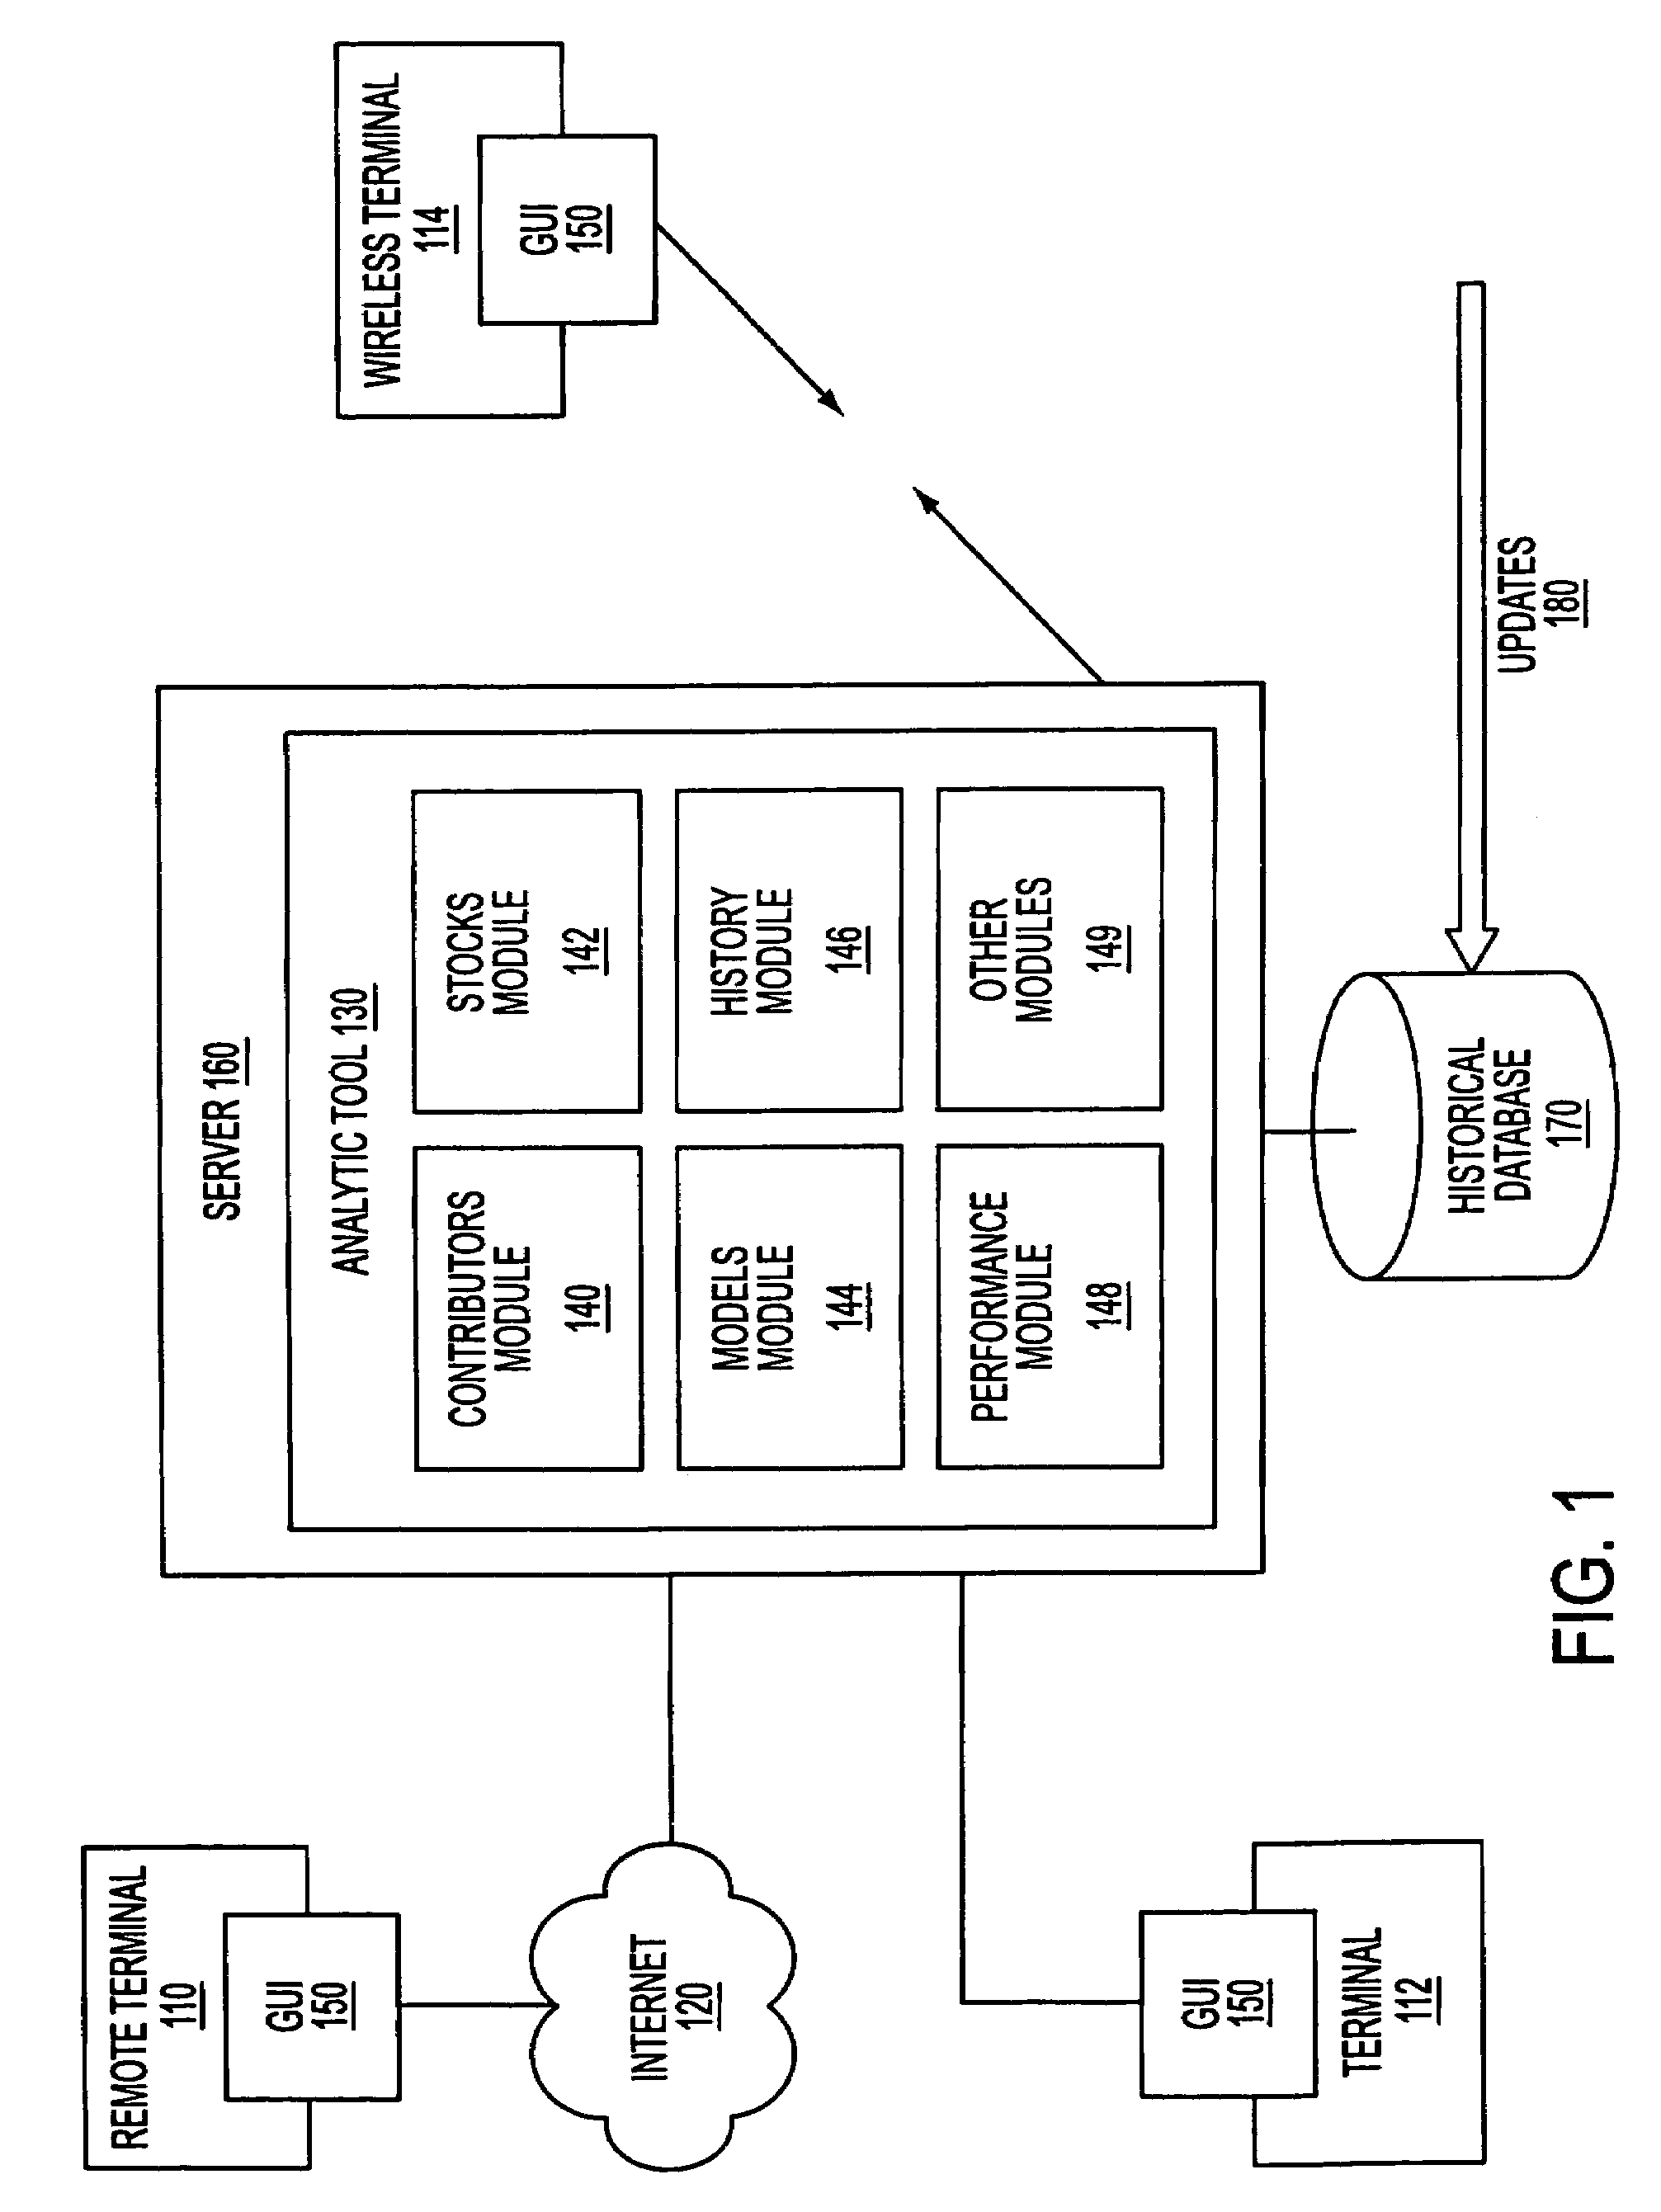 Security analyst estimates performance viewing system and method